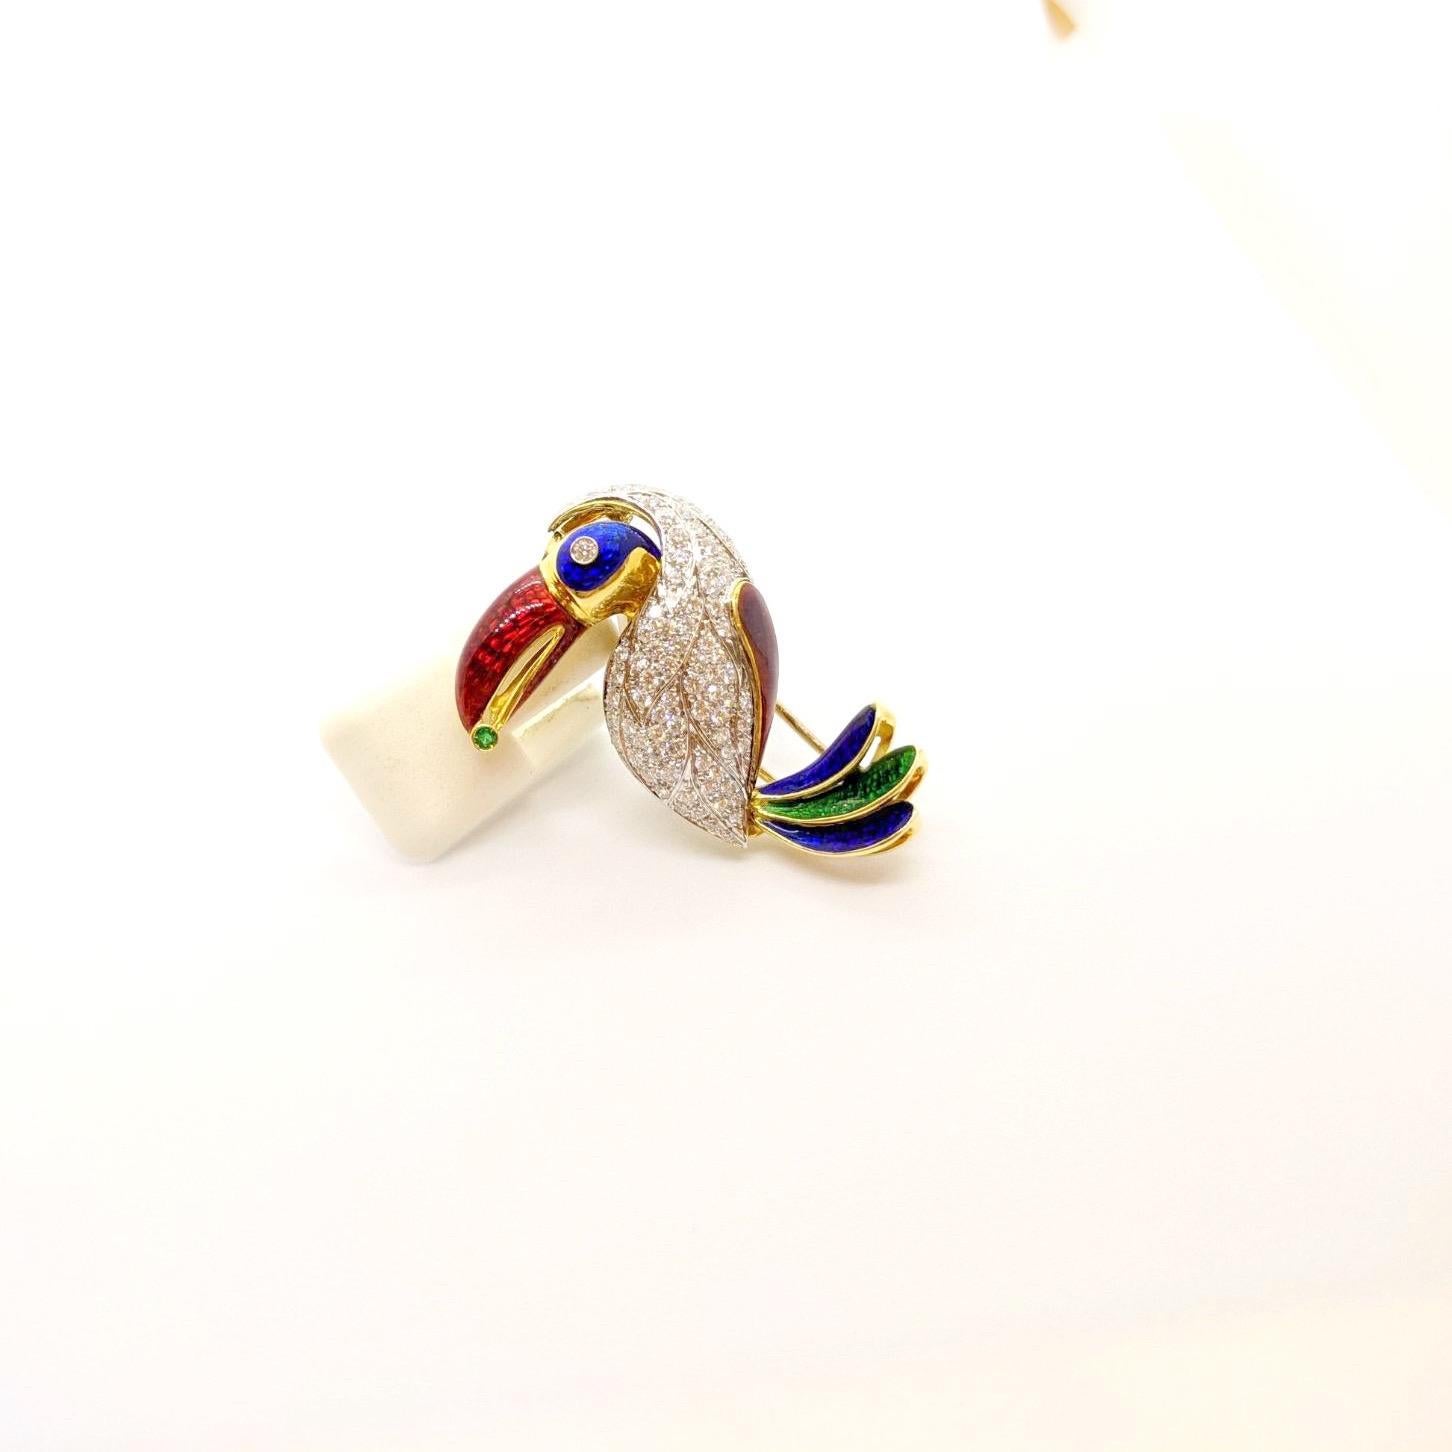 The absolute cutest Toucan. Set in 18 karat yellow and white gold, his feathers are set with round brilliant white diamonds. His eye , beak and tail feathers are crafted with guicholle enamel in red, blue, and green.  He has a bezel set diamond eye,